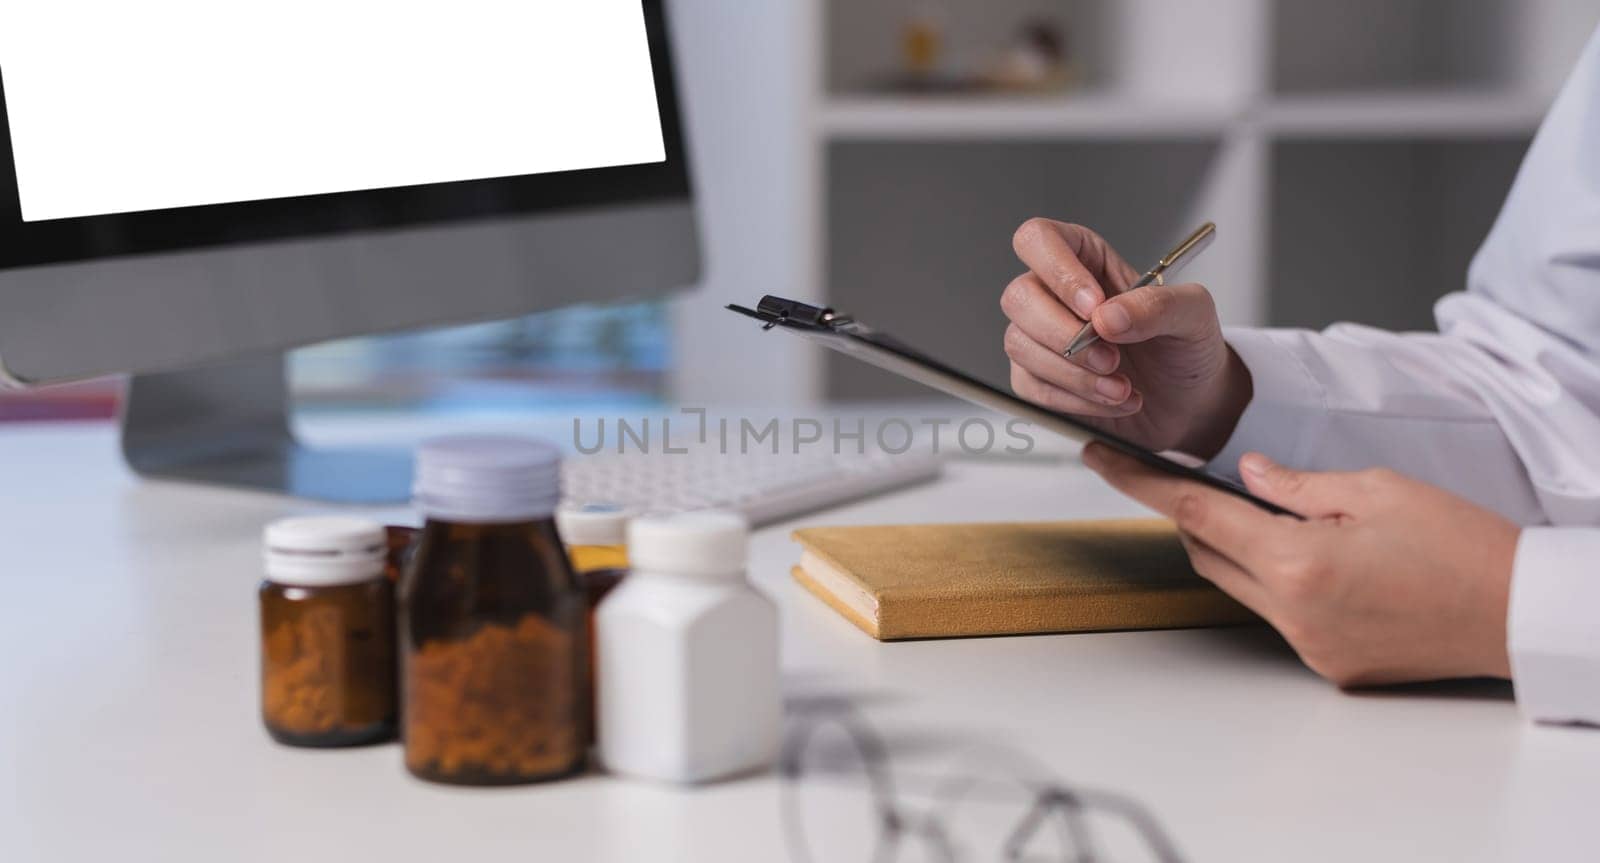 A doctor is writing on a clipboard in front of a computer monitor. The scene is set in a medical office with a desk and a computer. The doctor is using a pen to write on the clipboard